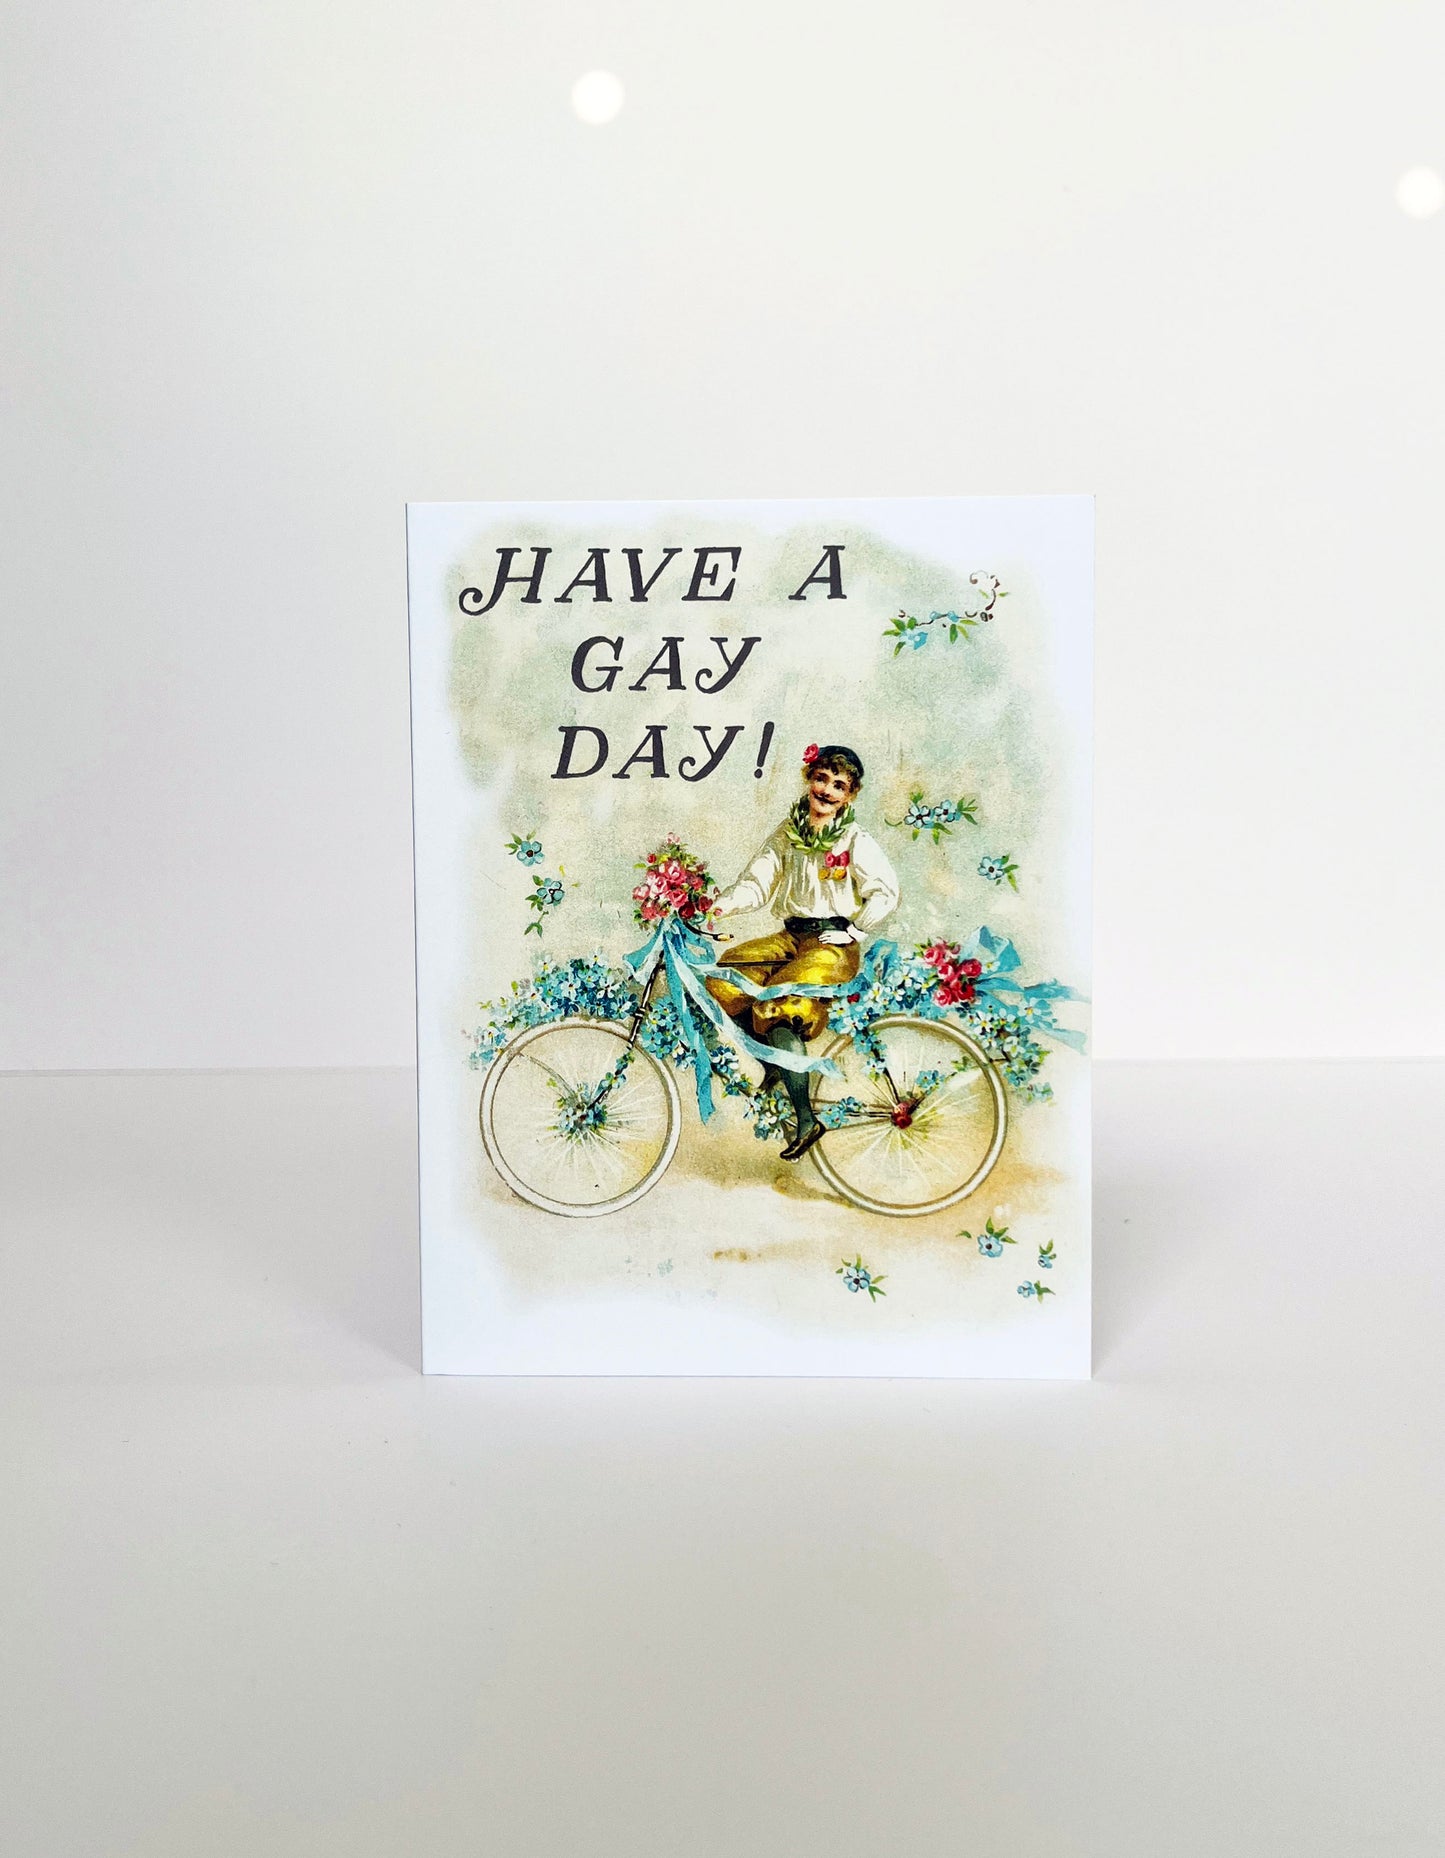 victorian style man with mustache on bicycle with blue pink flowers ribbons greeting card text have a gay day retro vintage style blank inside joyous fun celebratory exciting lgbtq playful bold coin laundry 